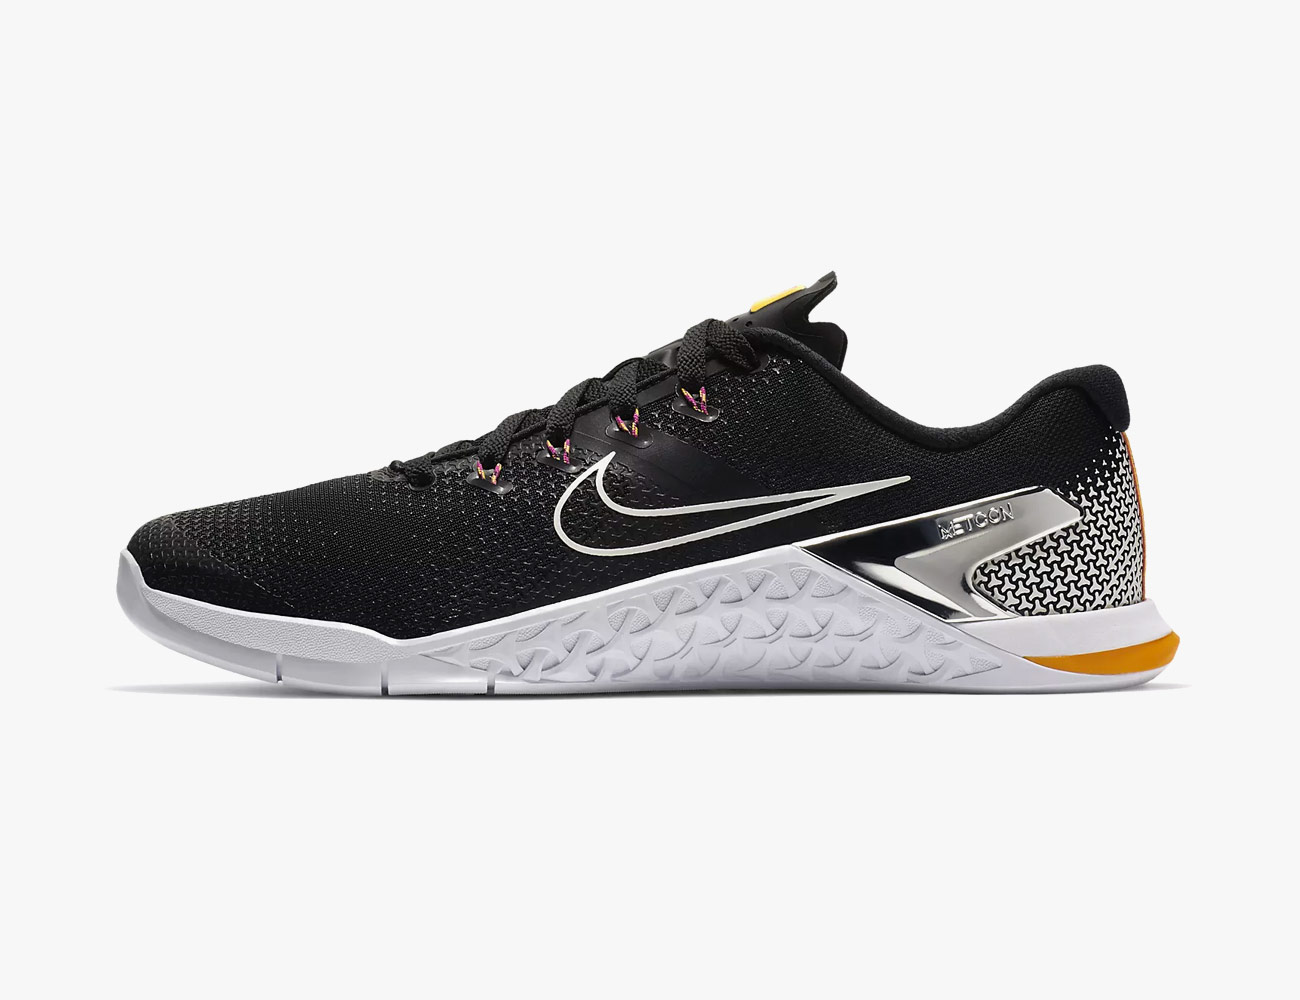 best shoes for the gym and running